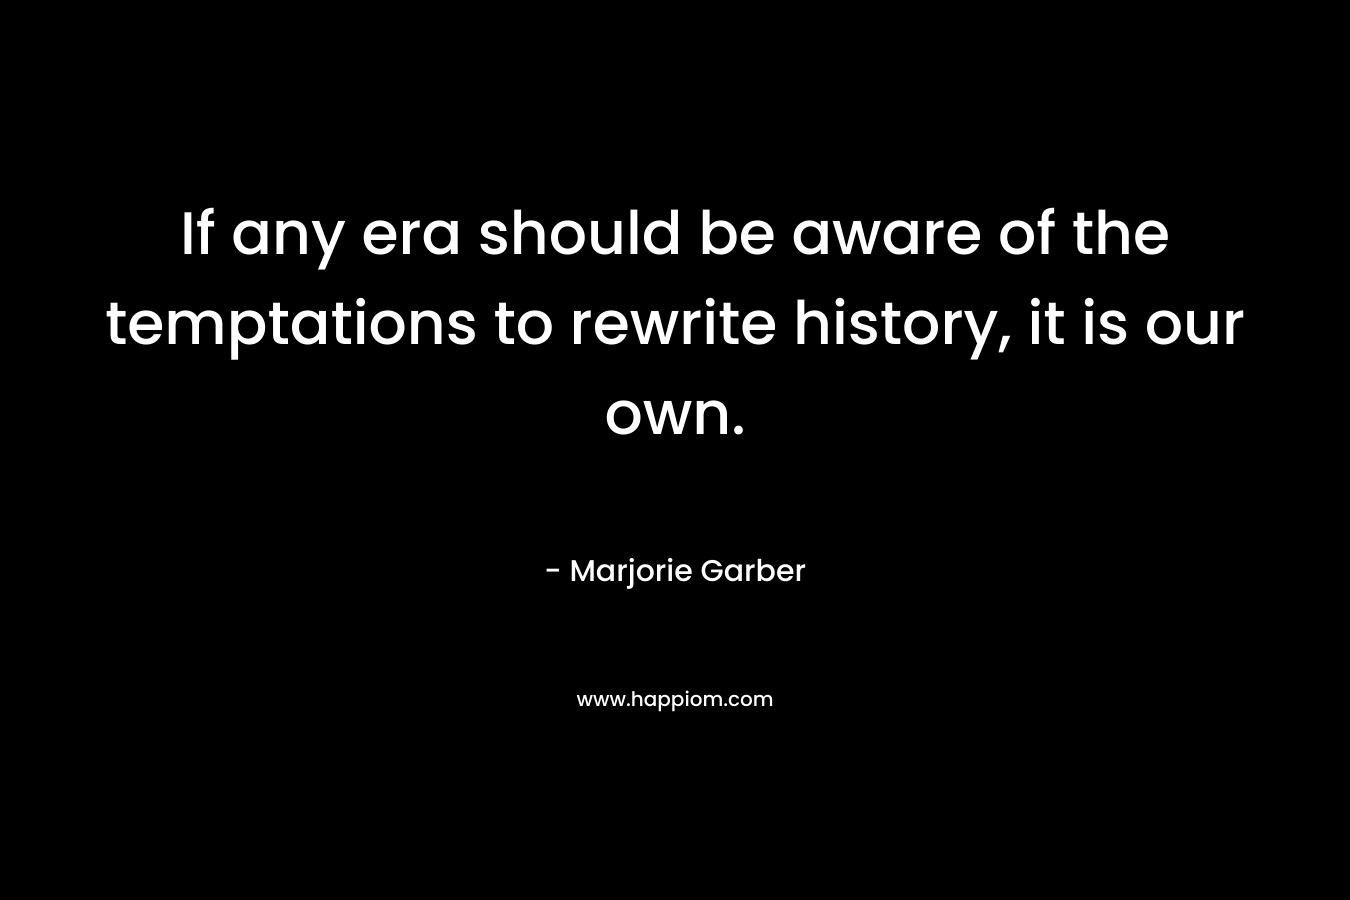 If any era should be aware of the temptations to rewrite history, it is our own.